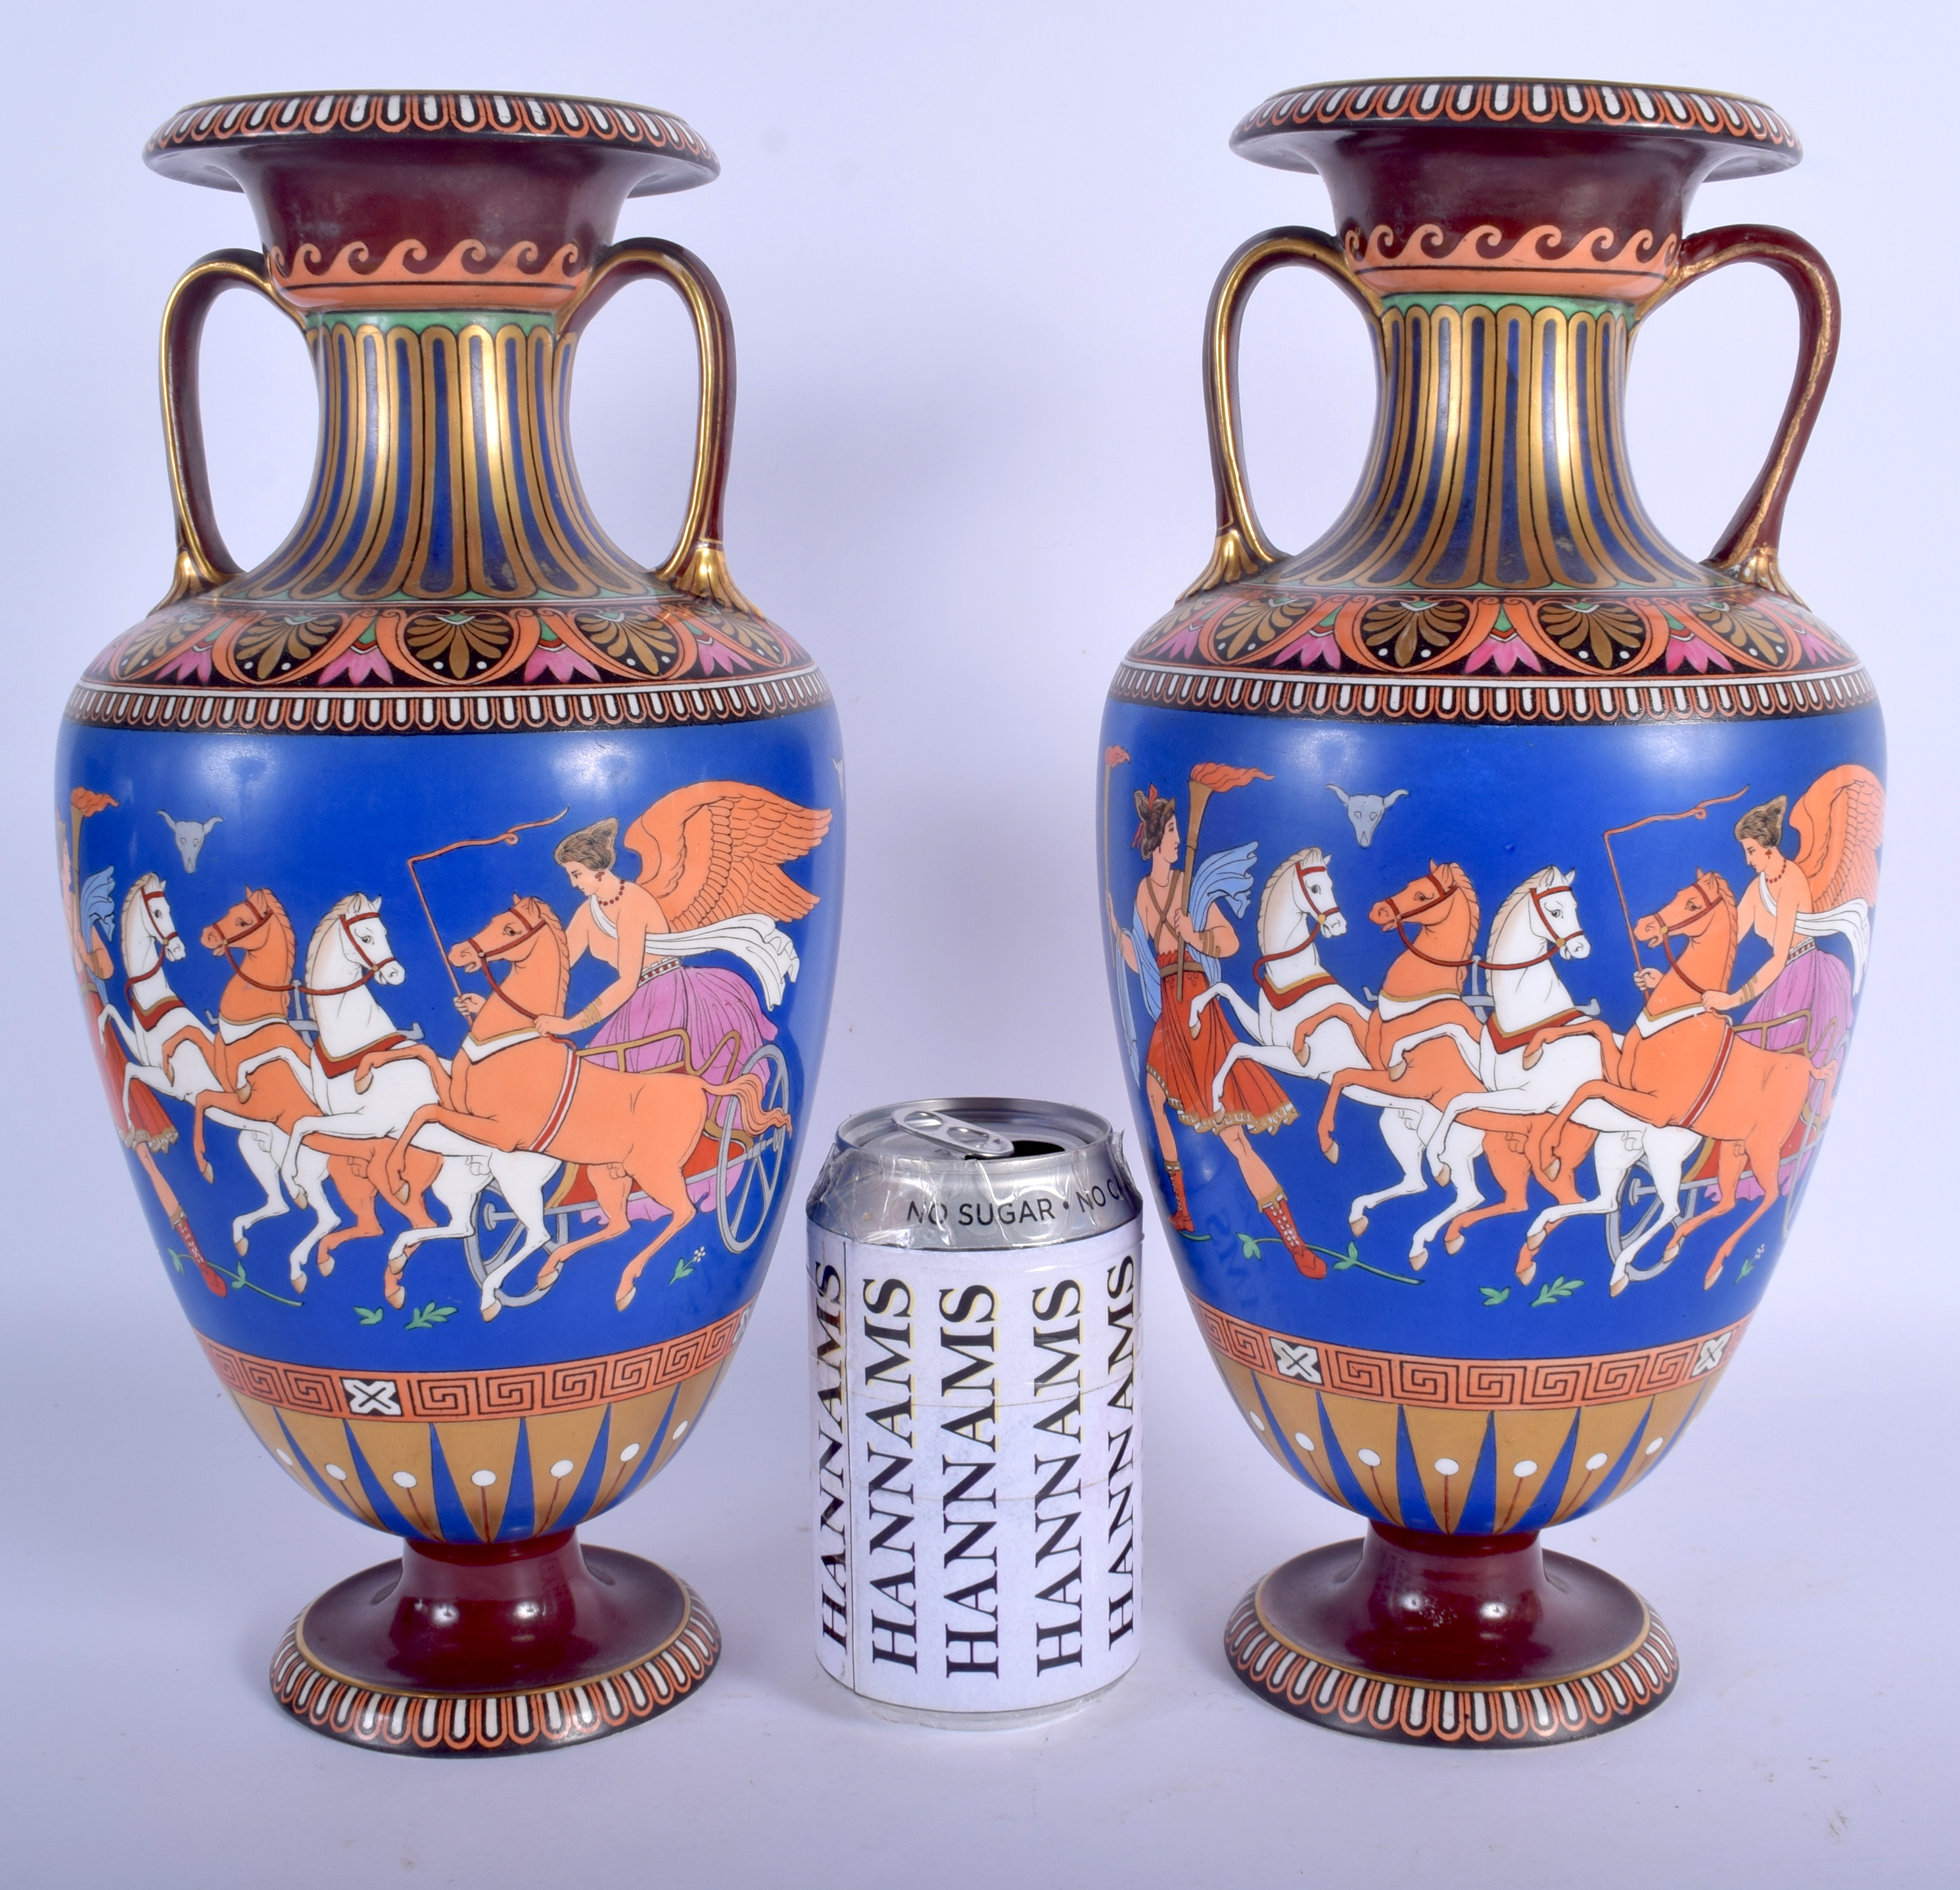 A PAIR OF 19TH CENTURY ENGLISH TWIN HANDLED ETRUSCAN REVIVAL VASES After the Antique, decorated with